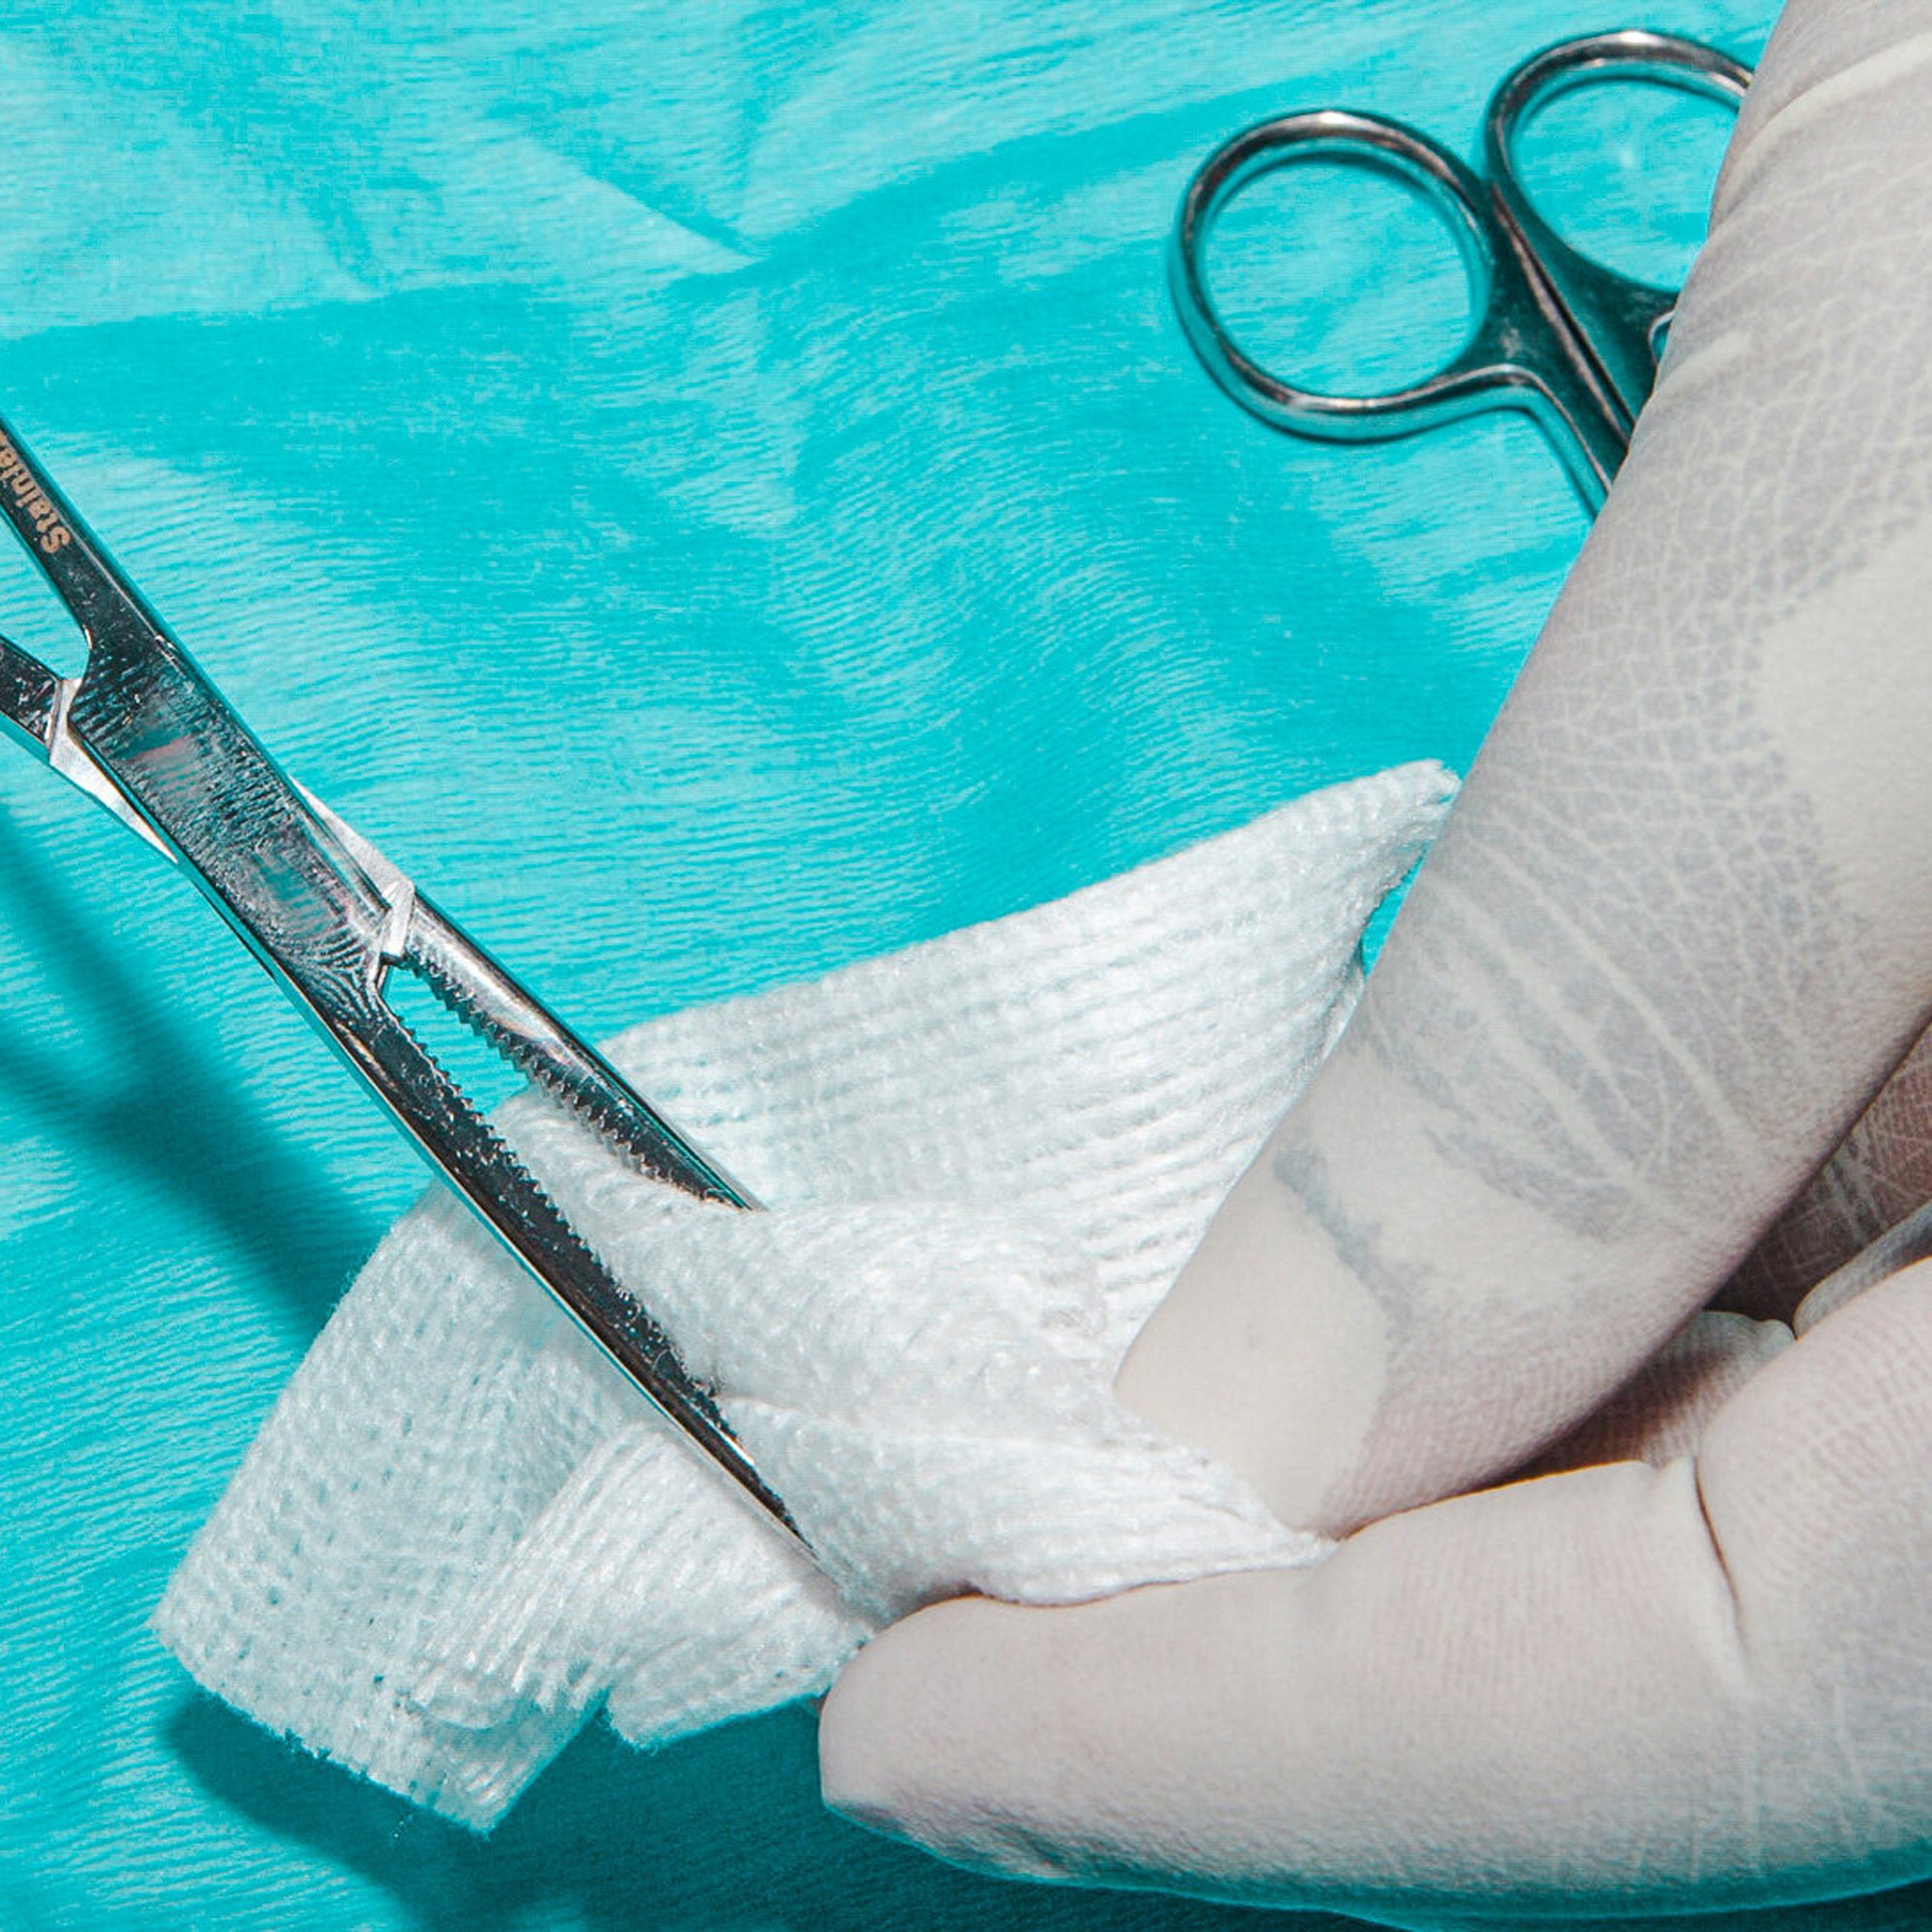  Location-based photography shows off your business and how it operates. Photo of a surgical Technician loading a surgical sponge on a surgical clamp. 